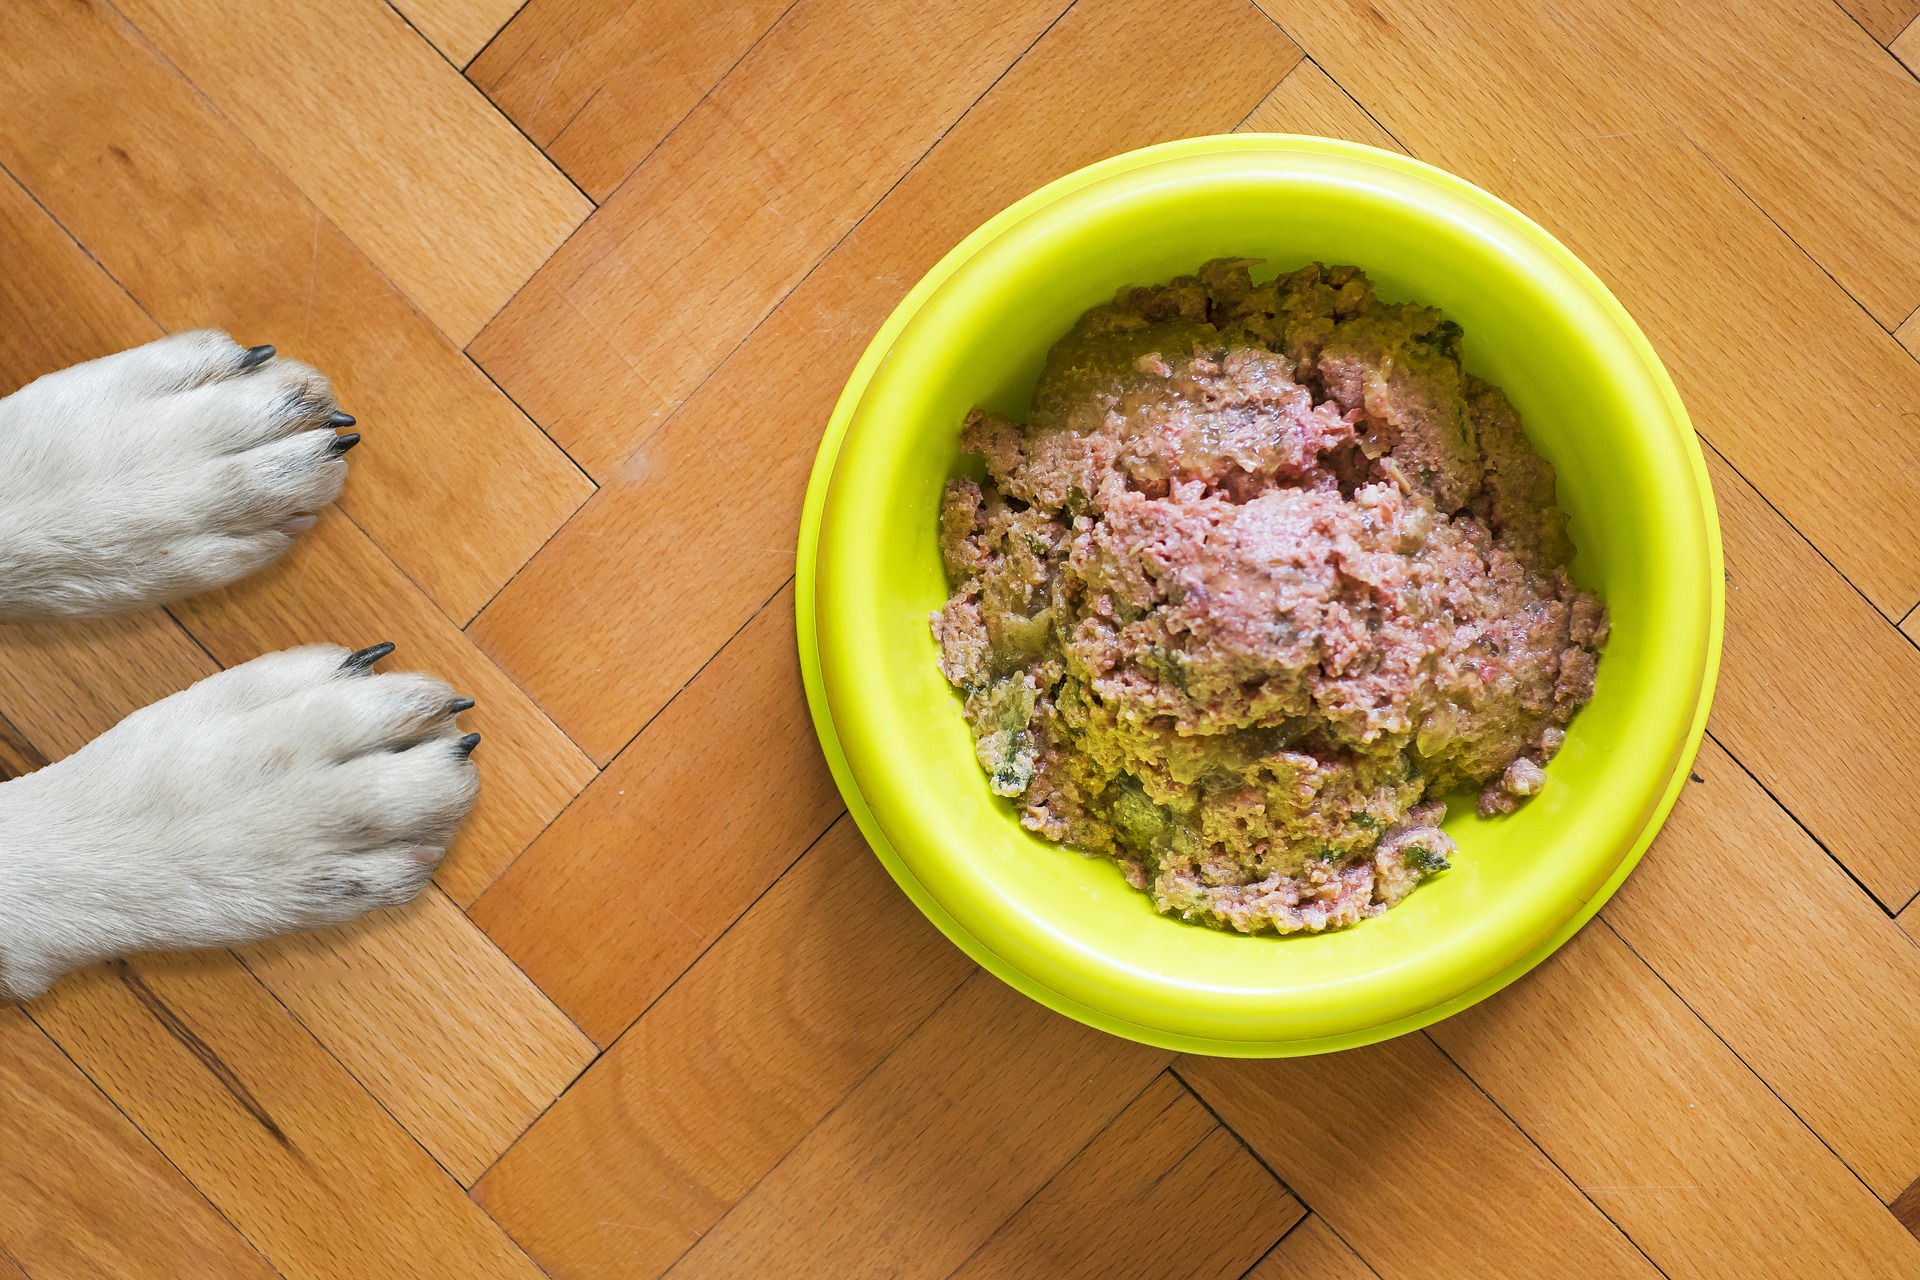 Expensive eats? Comparing the costs of different types of dog food